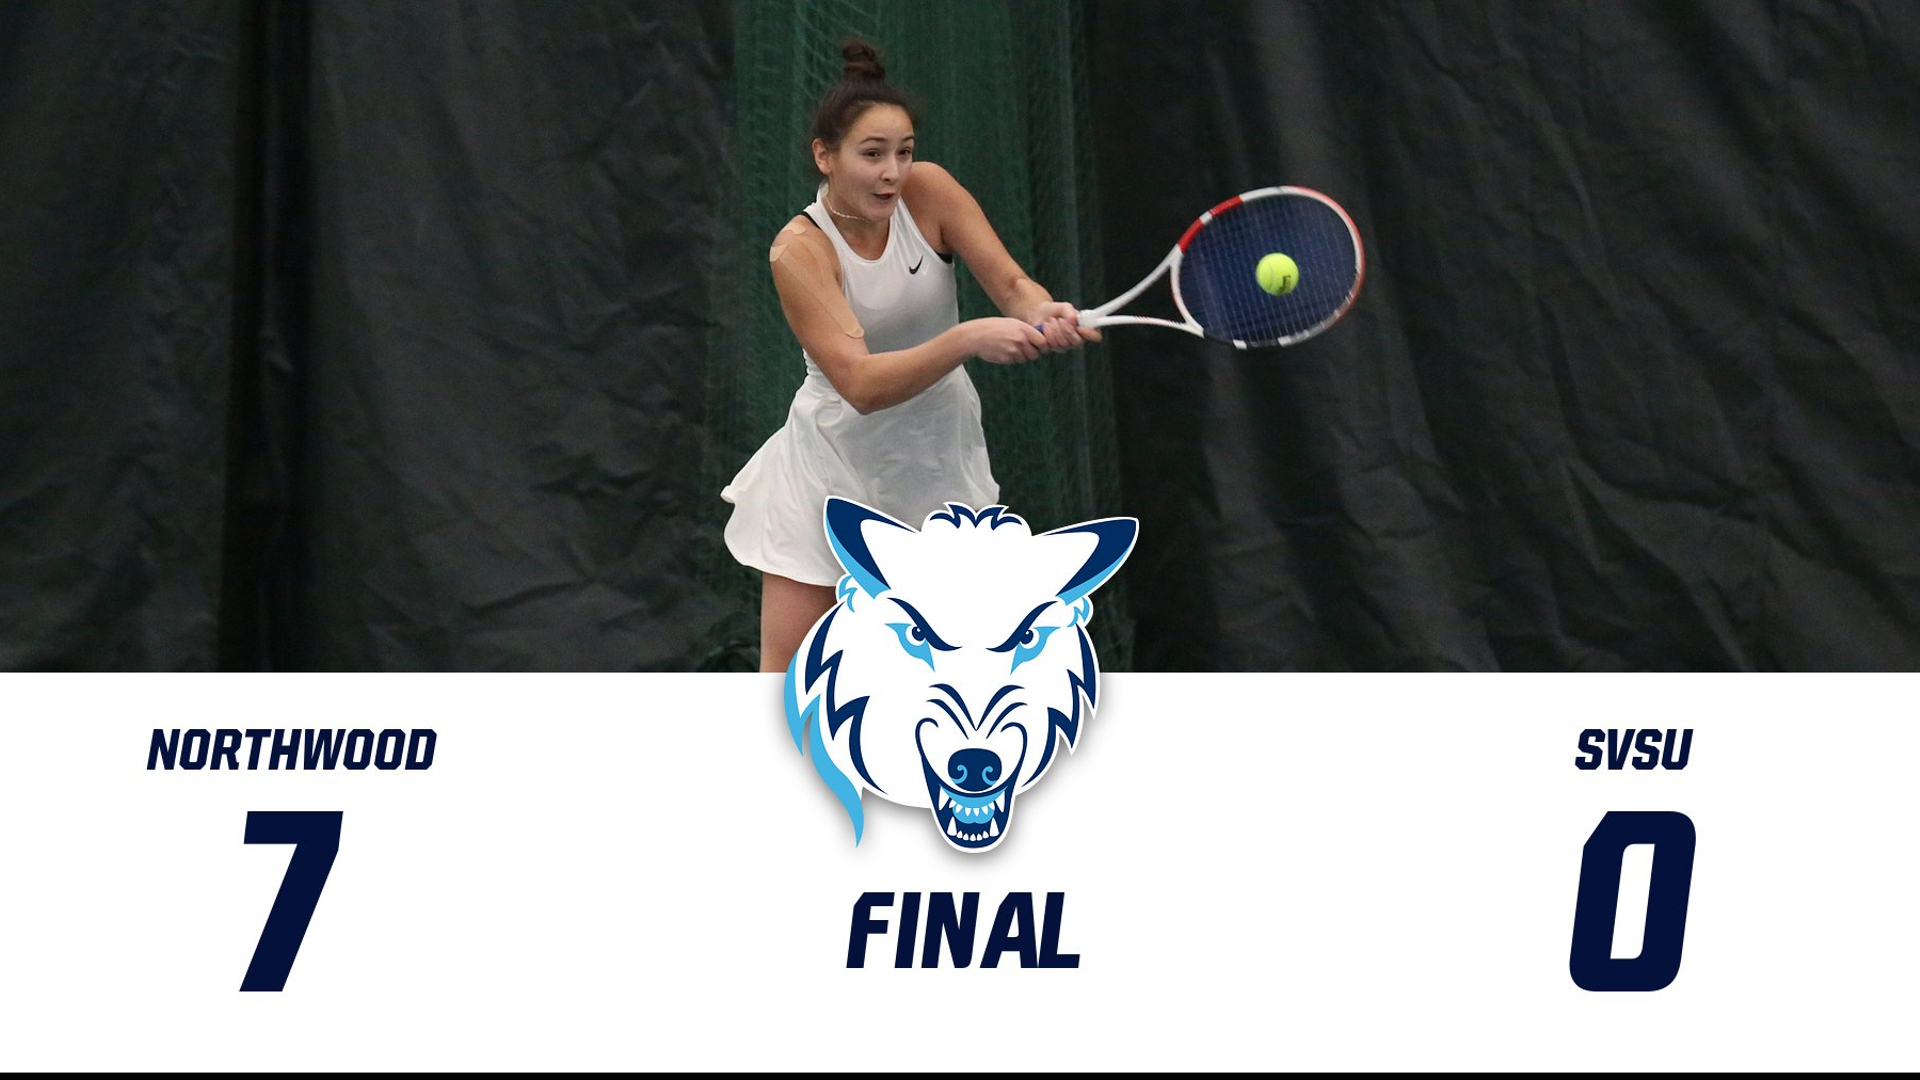 Women's Tennis Opens GLIAC Play With 7-0 Sweep Over Saginaw Valley